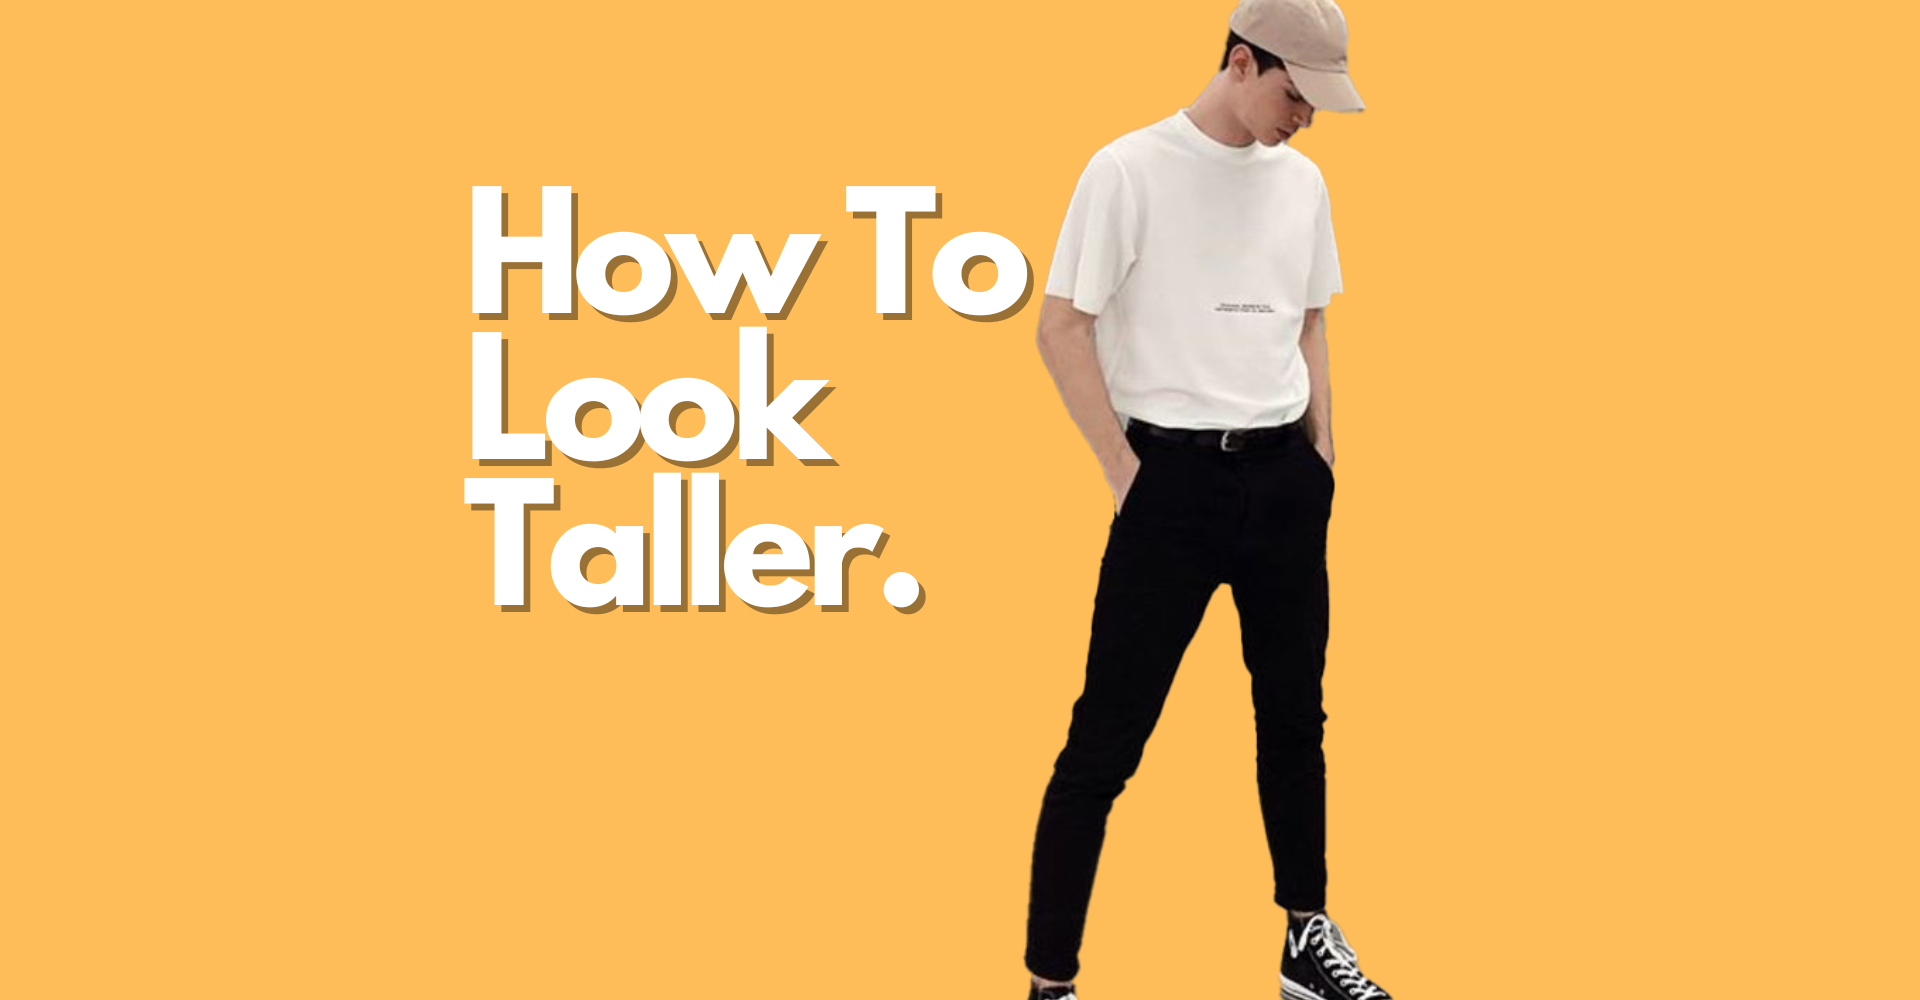 https://onpointfresh.com/wp-content/uploads/2022/10/Tips-To-Look-Taller..png